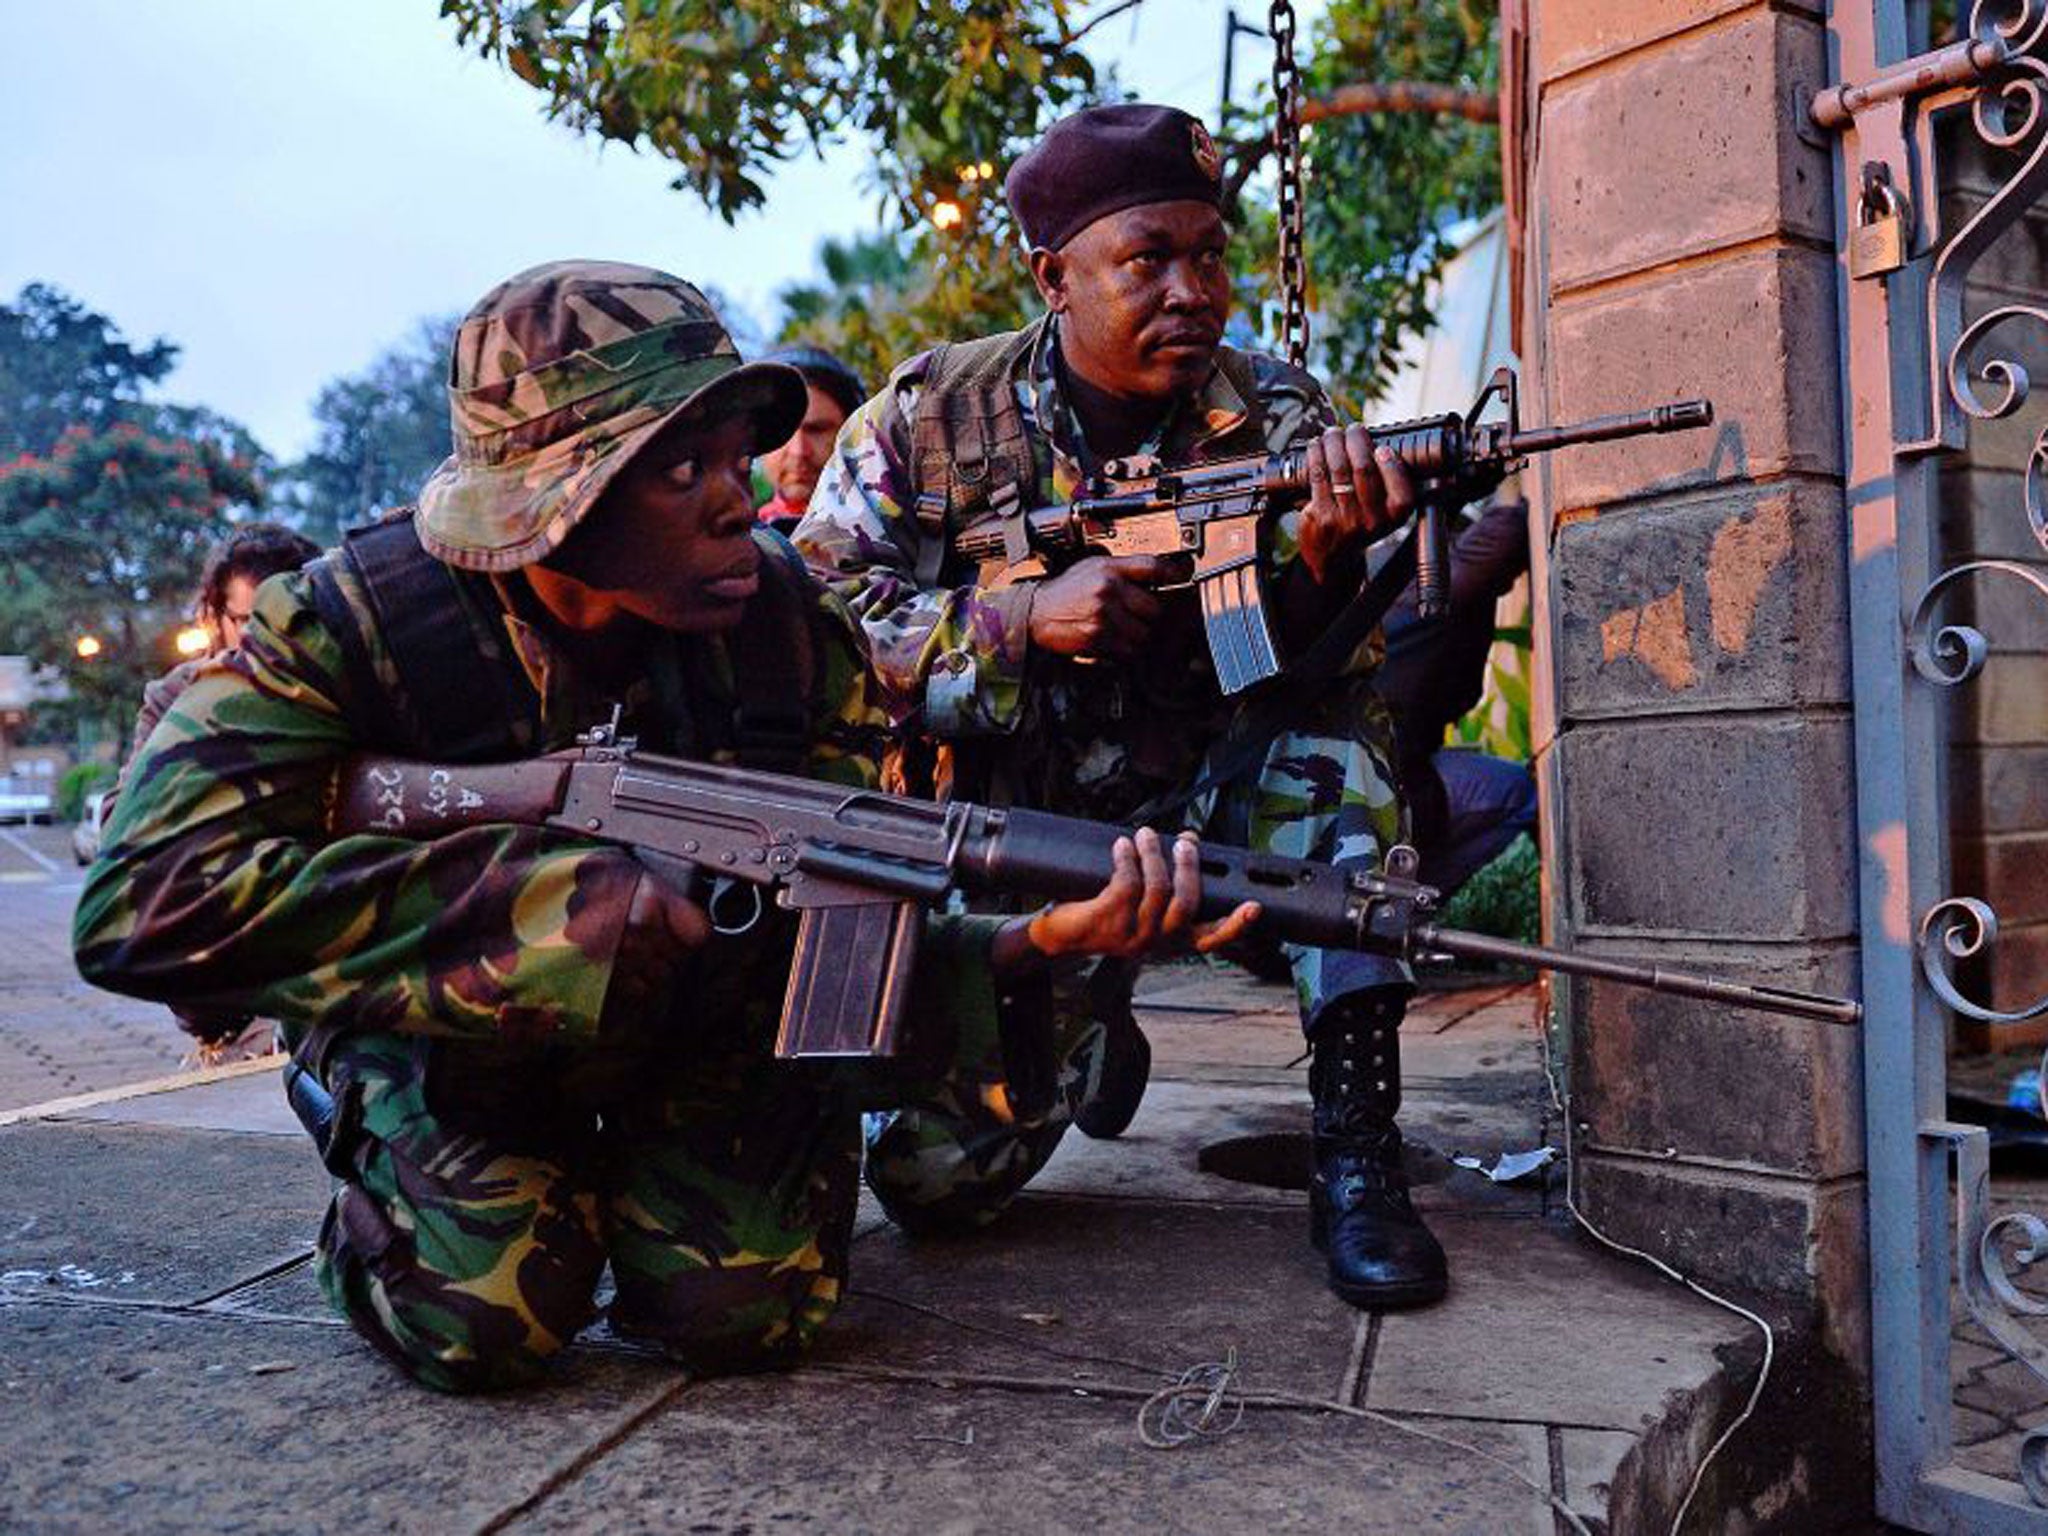 Kenyan soldiers officers at the stand-off in Nairobi